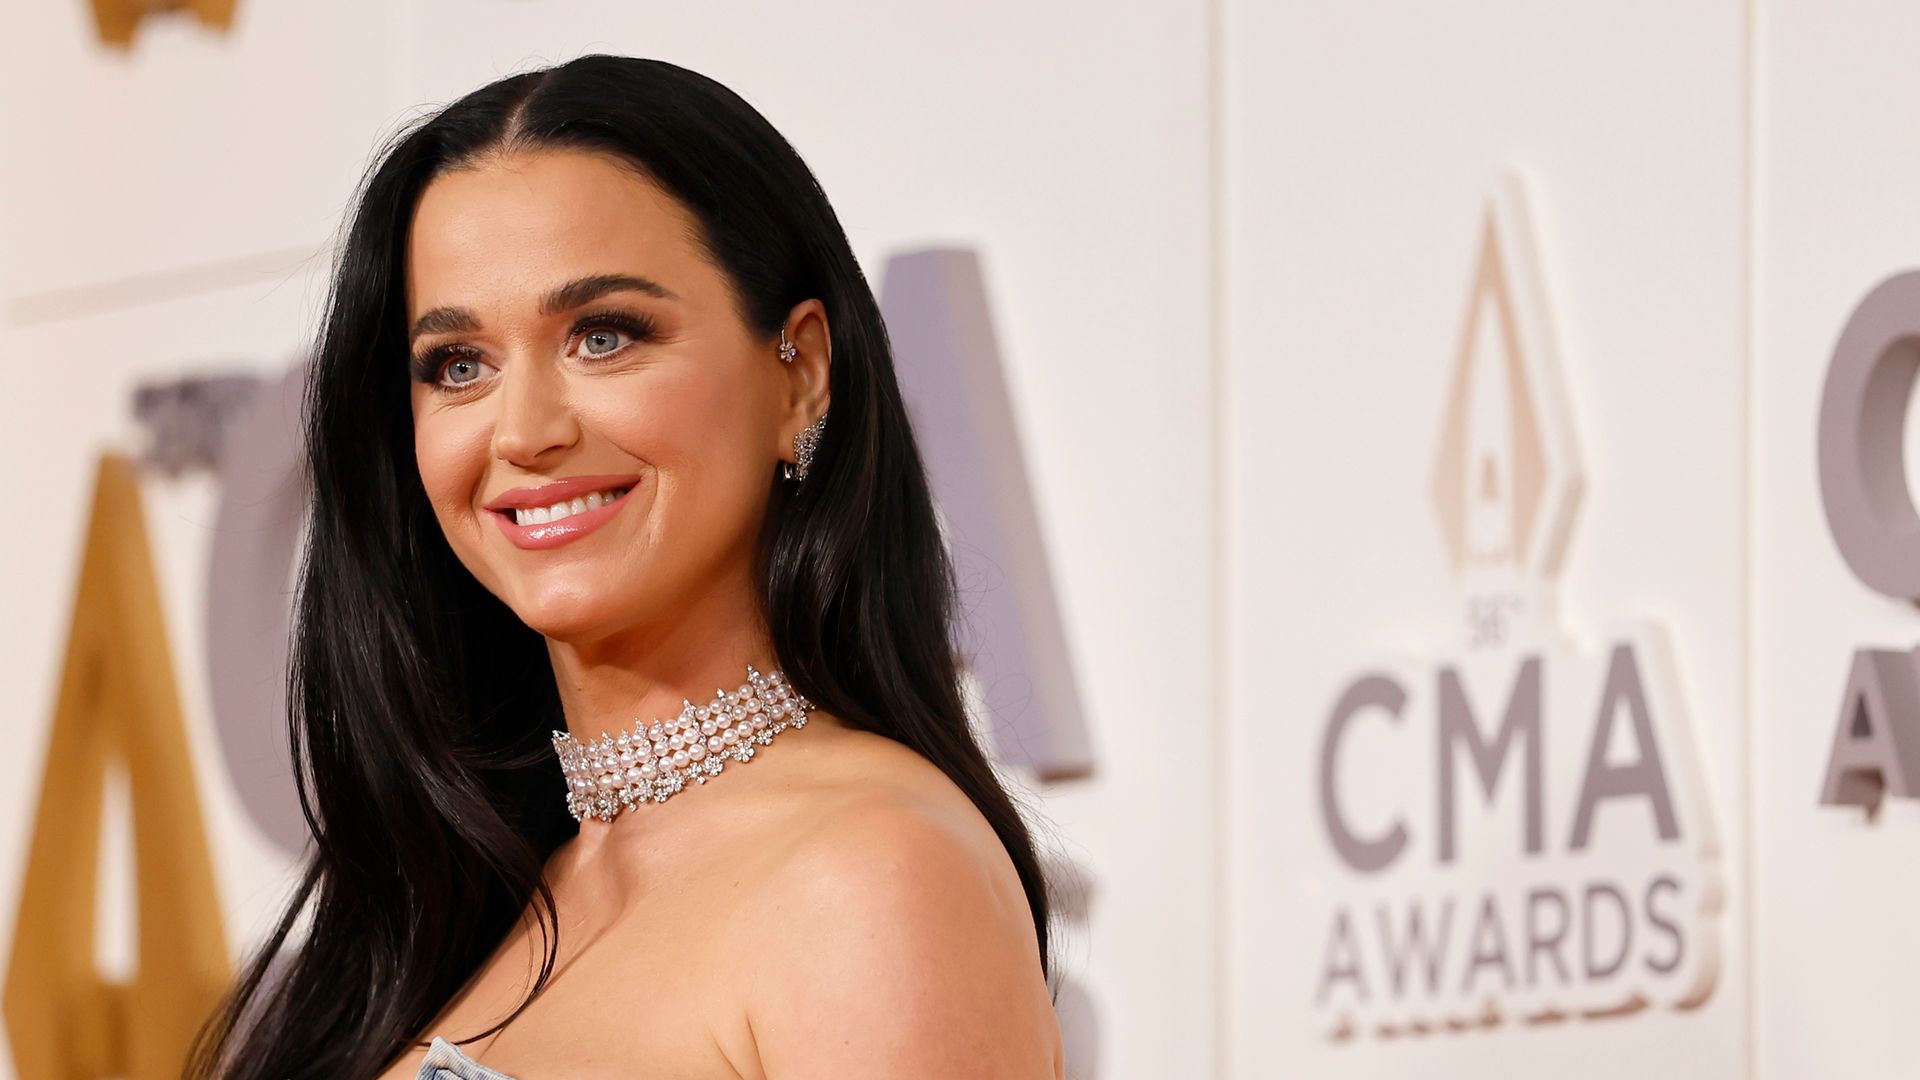 Katy Perry attends The 56th Annual CMA Awards at Bridgestone Arena on November 09, 2022 in Nashville, Tennessee